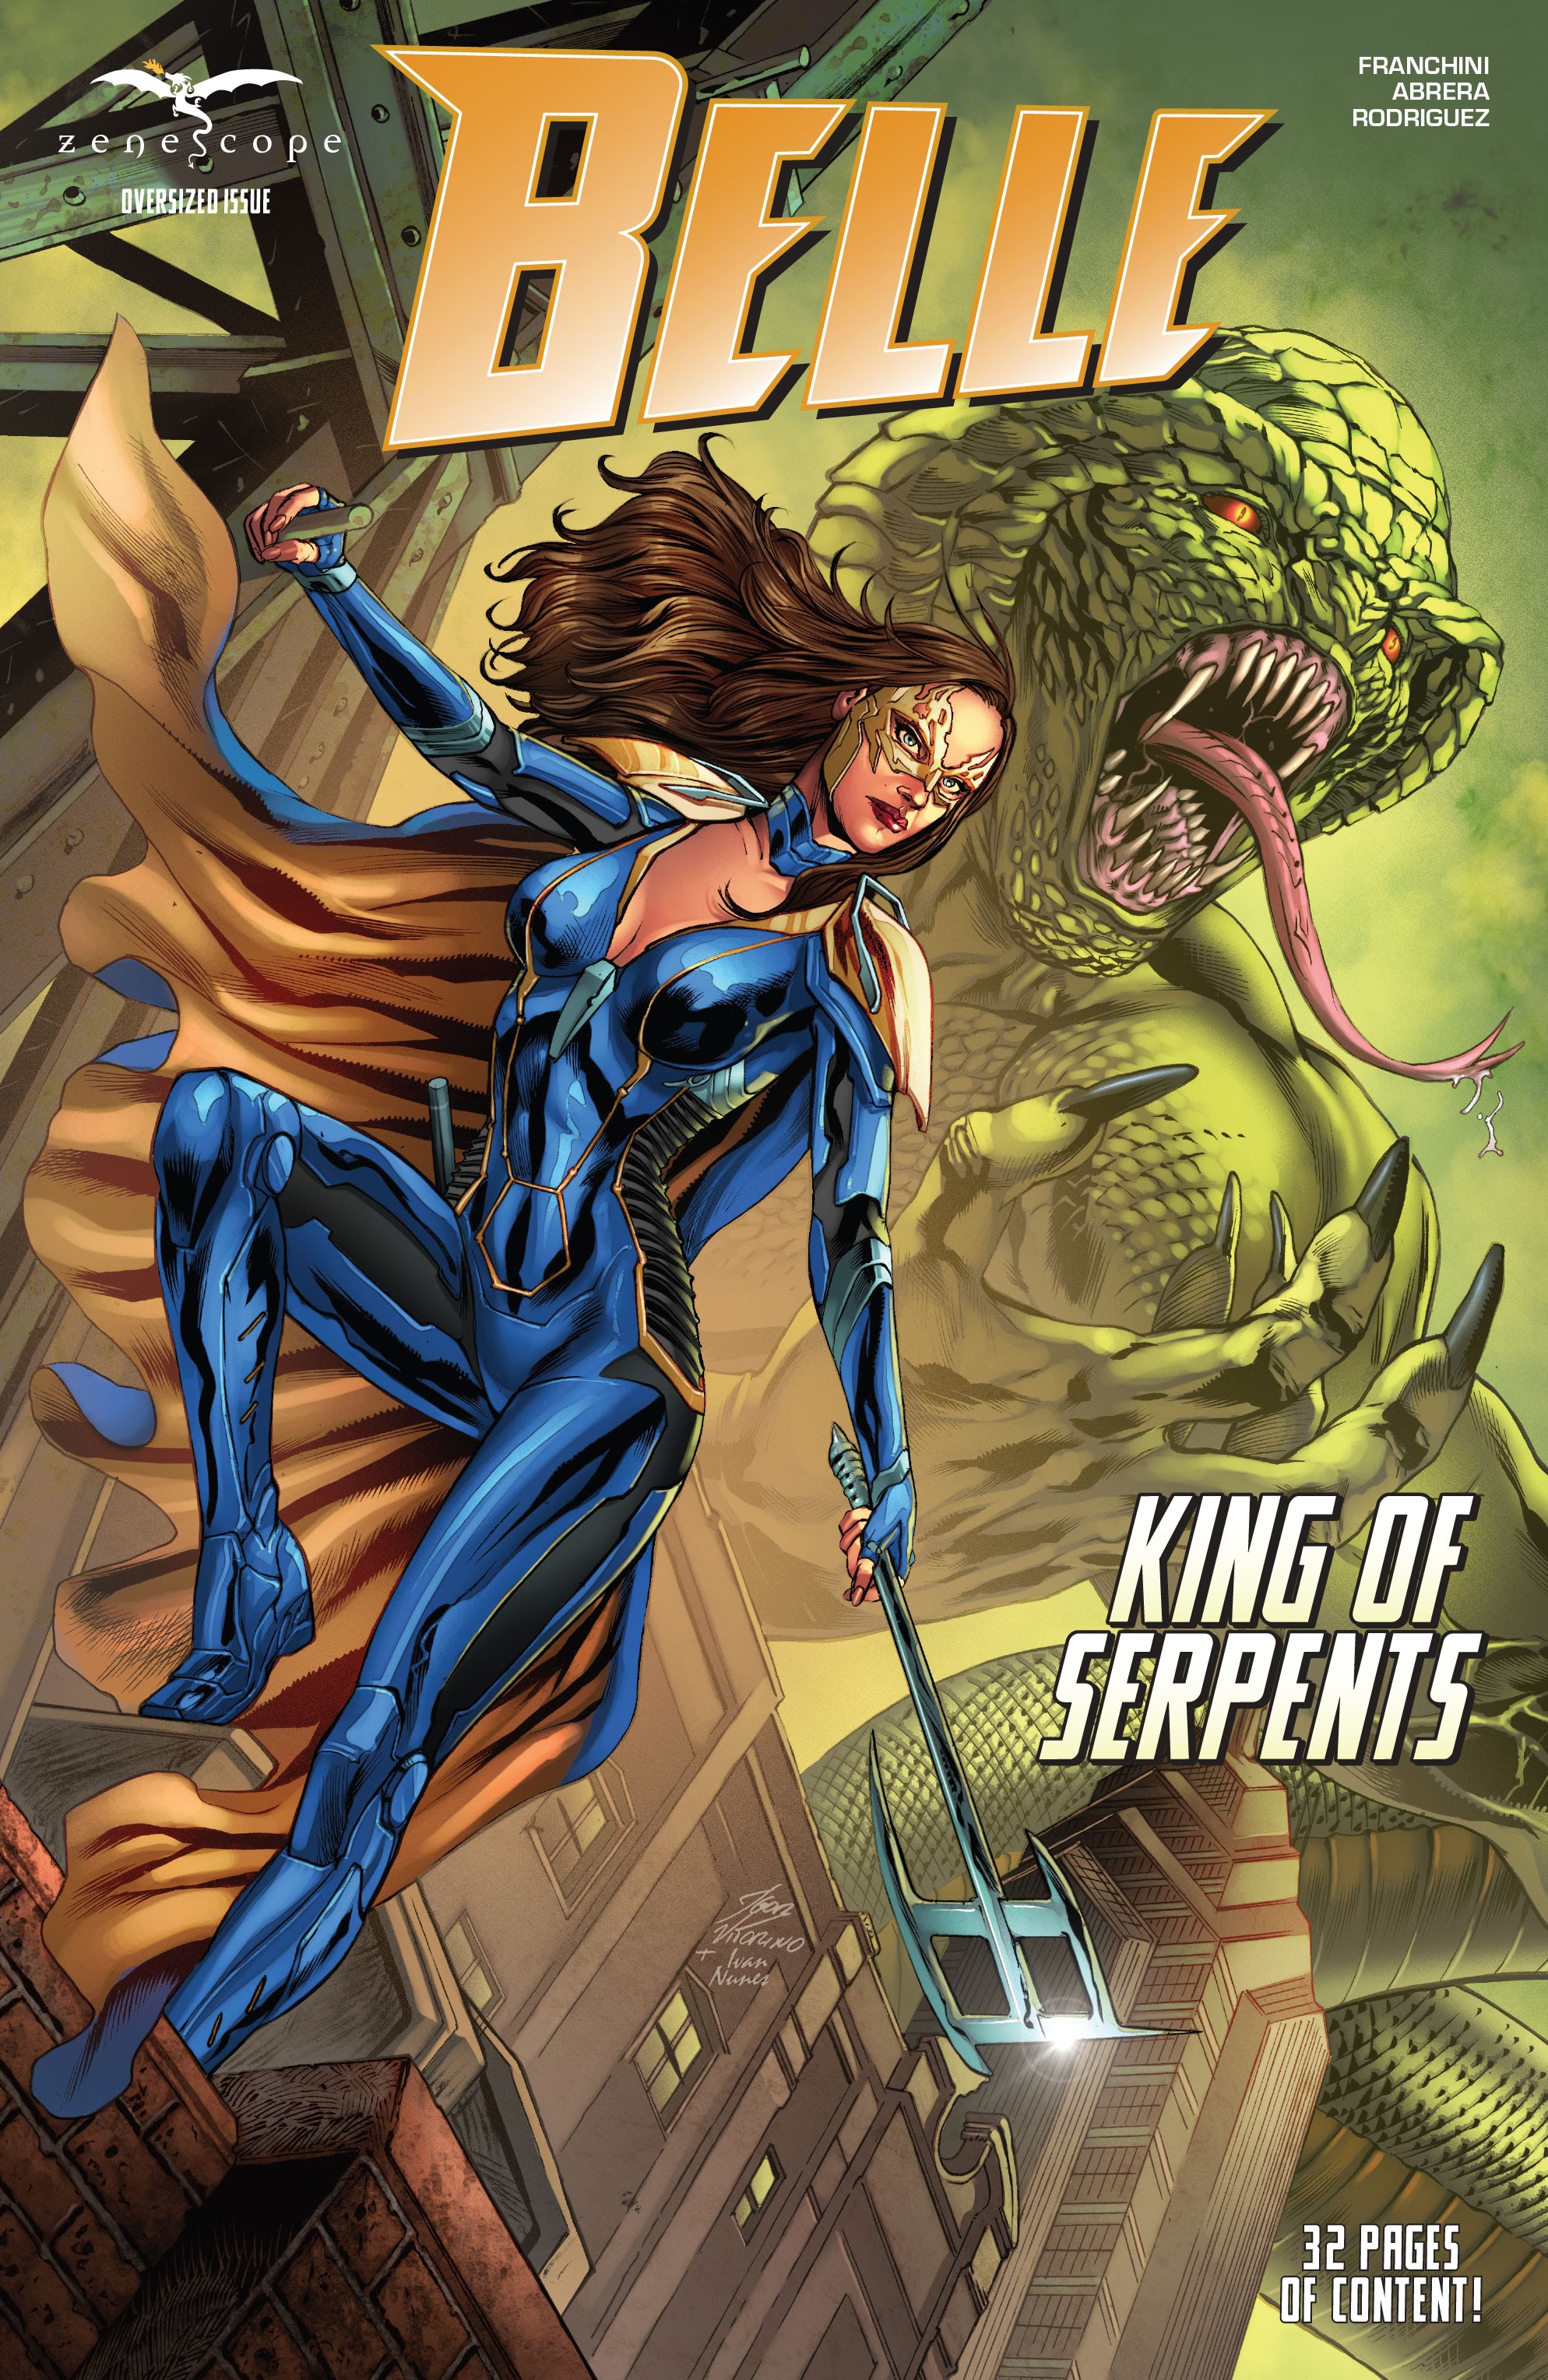 Read online Belle: King of Serpents comic -  Issue # Full - 1